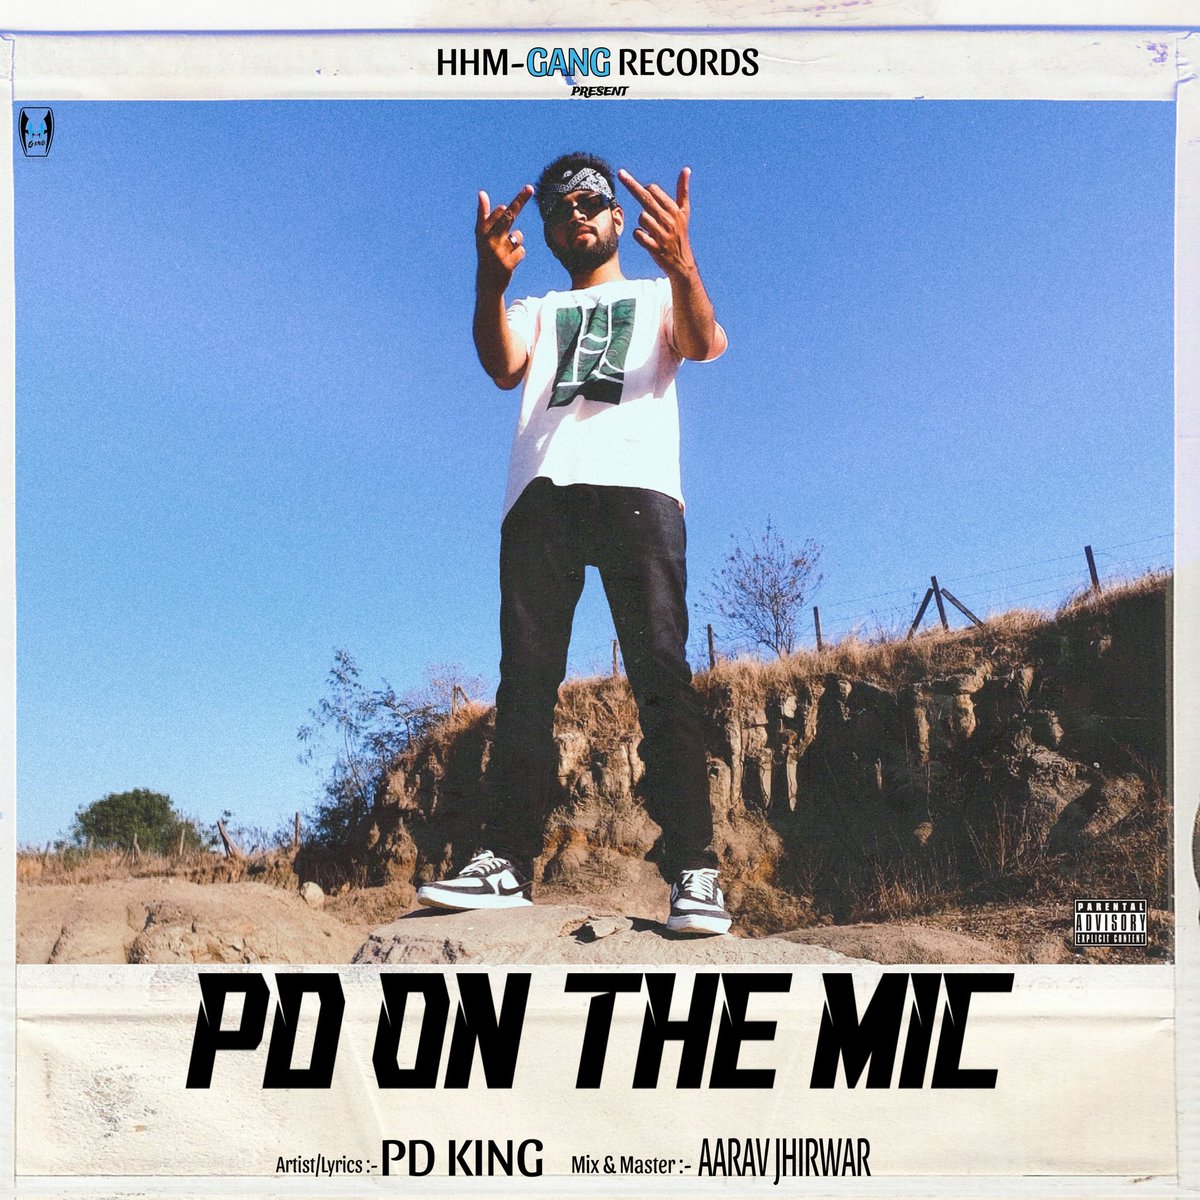 • Song : PD ON THE MIC 🧿🙈🕉
youtu.be/k3xt0Iq5VRE?si…

Written & Performed by : PD KING 
Label : @hhmgang
#pdonthemic #ep #hiphopmonster #hhmgang  #youtube #instagram #twitter #rapperpdking #pdking #laapata #shoot #time #newmusic #outsoon